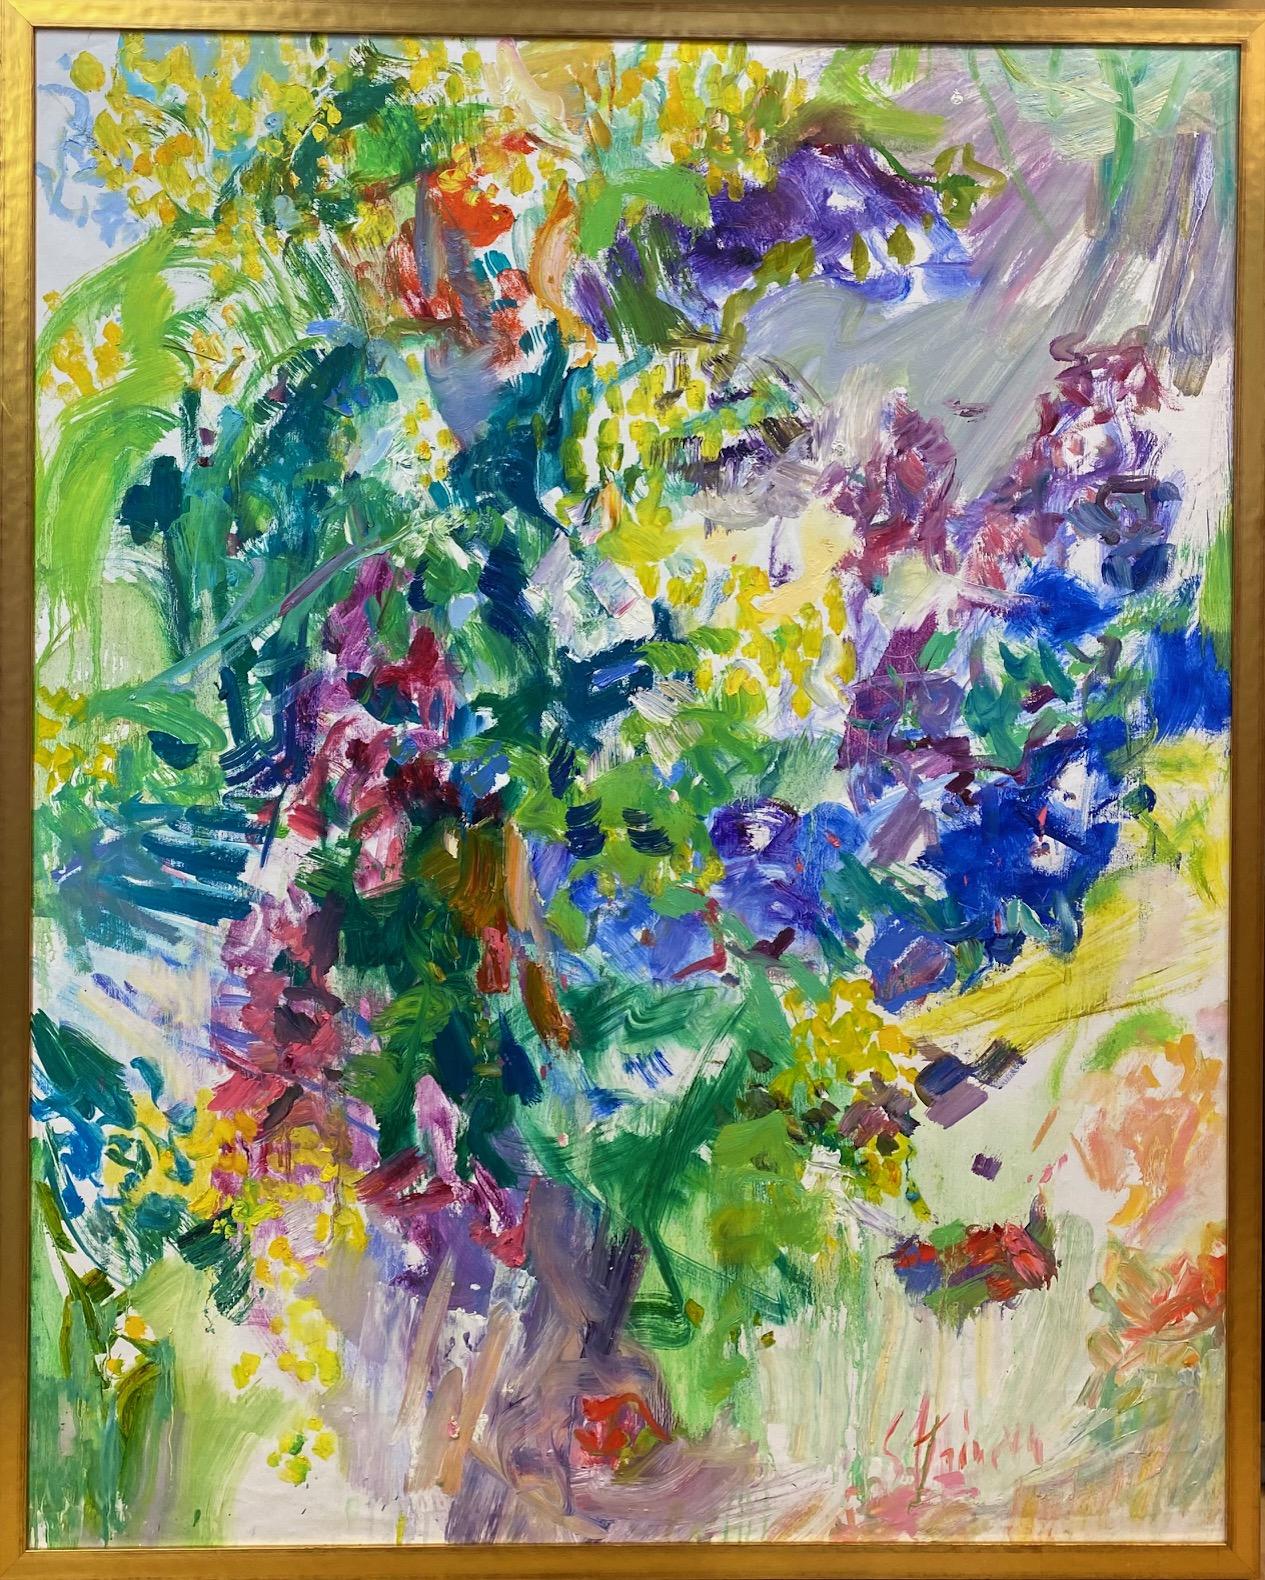 Sonia Grineva Landscape Painting - In Search of Harmony, 49x39 original abstract impressionist floral landscape